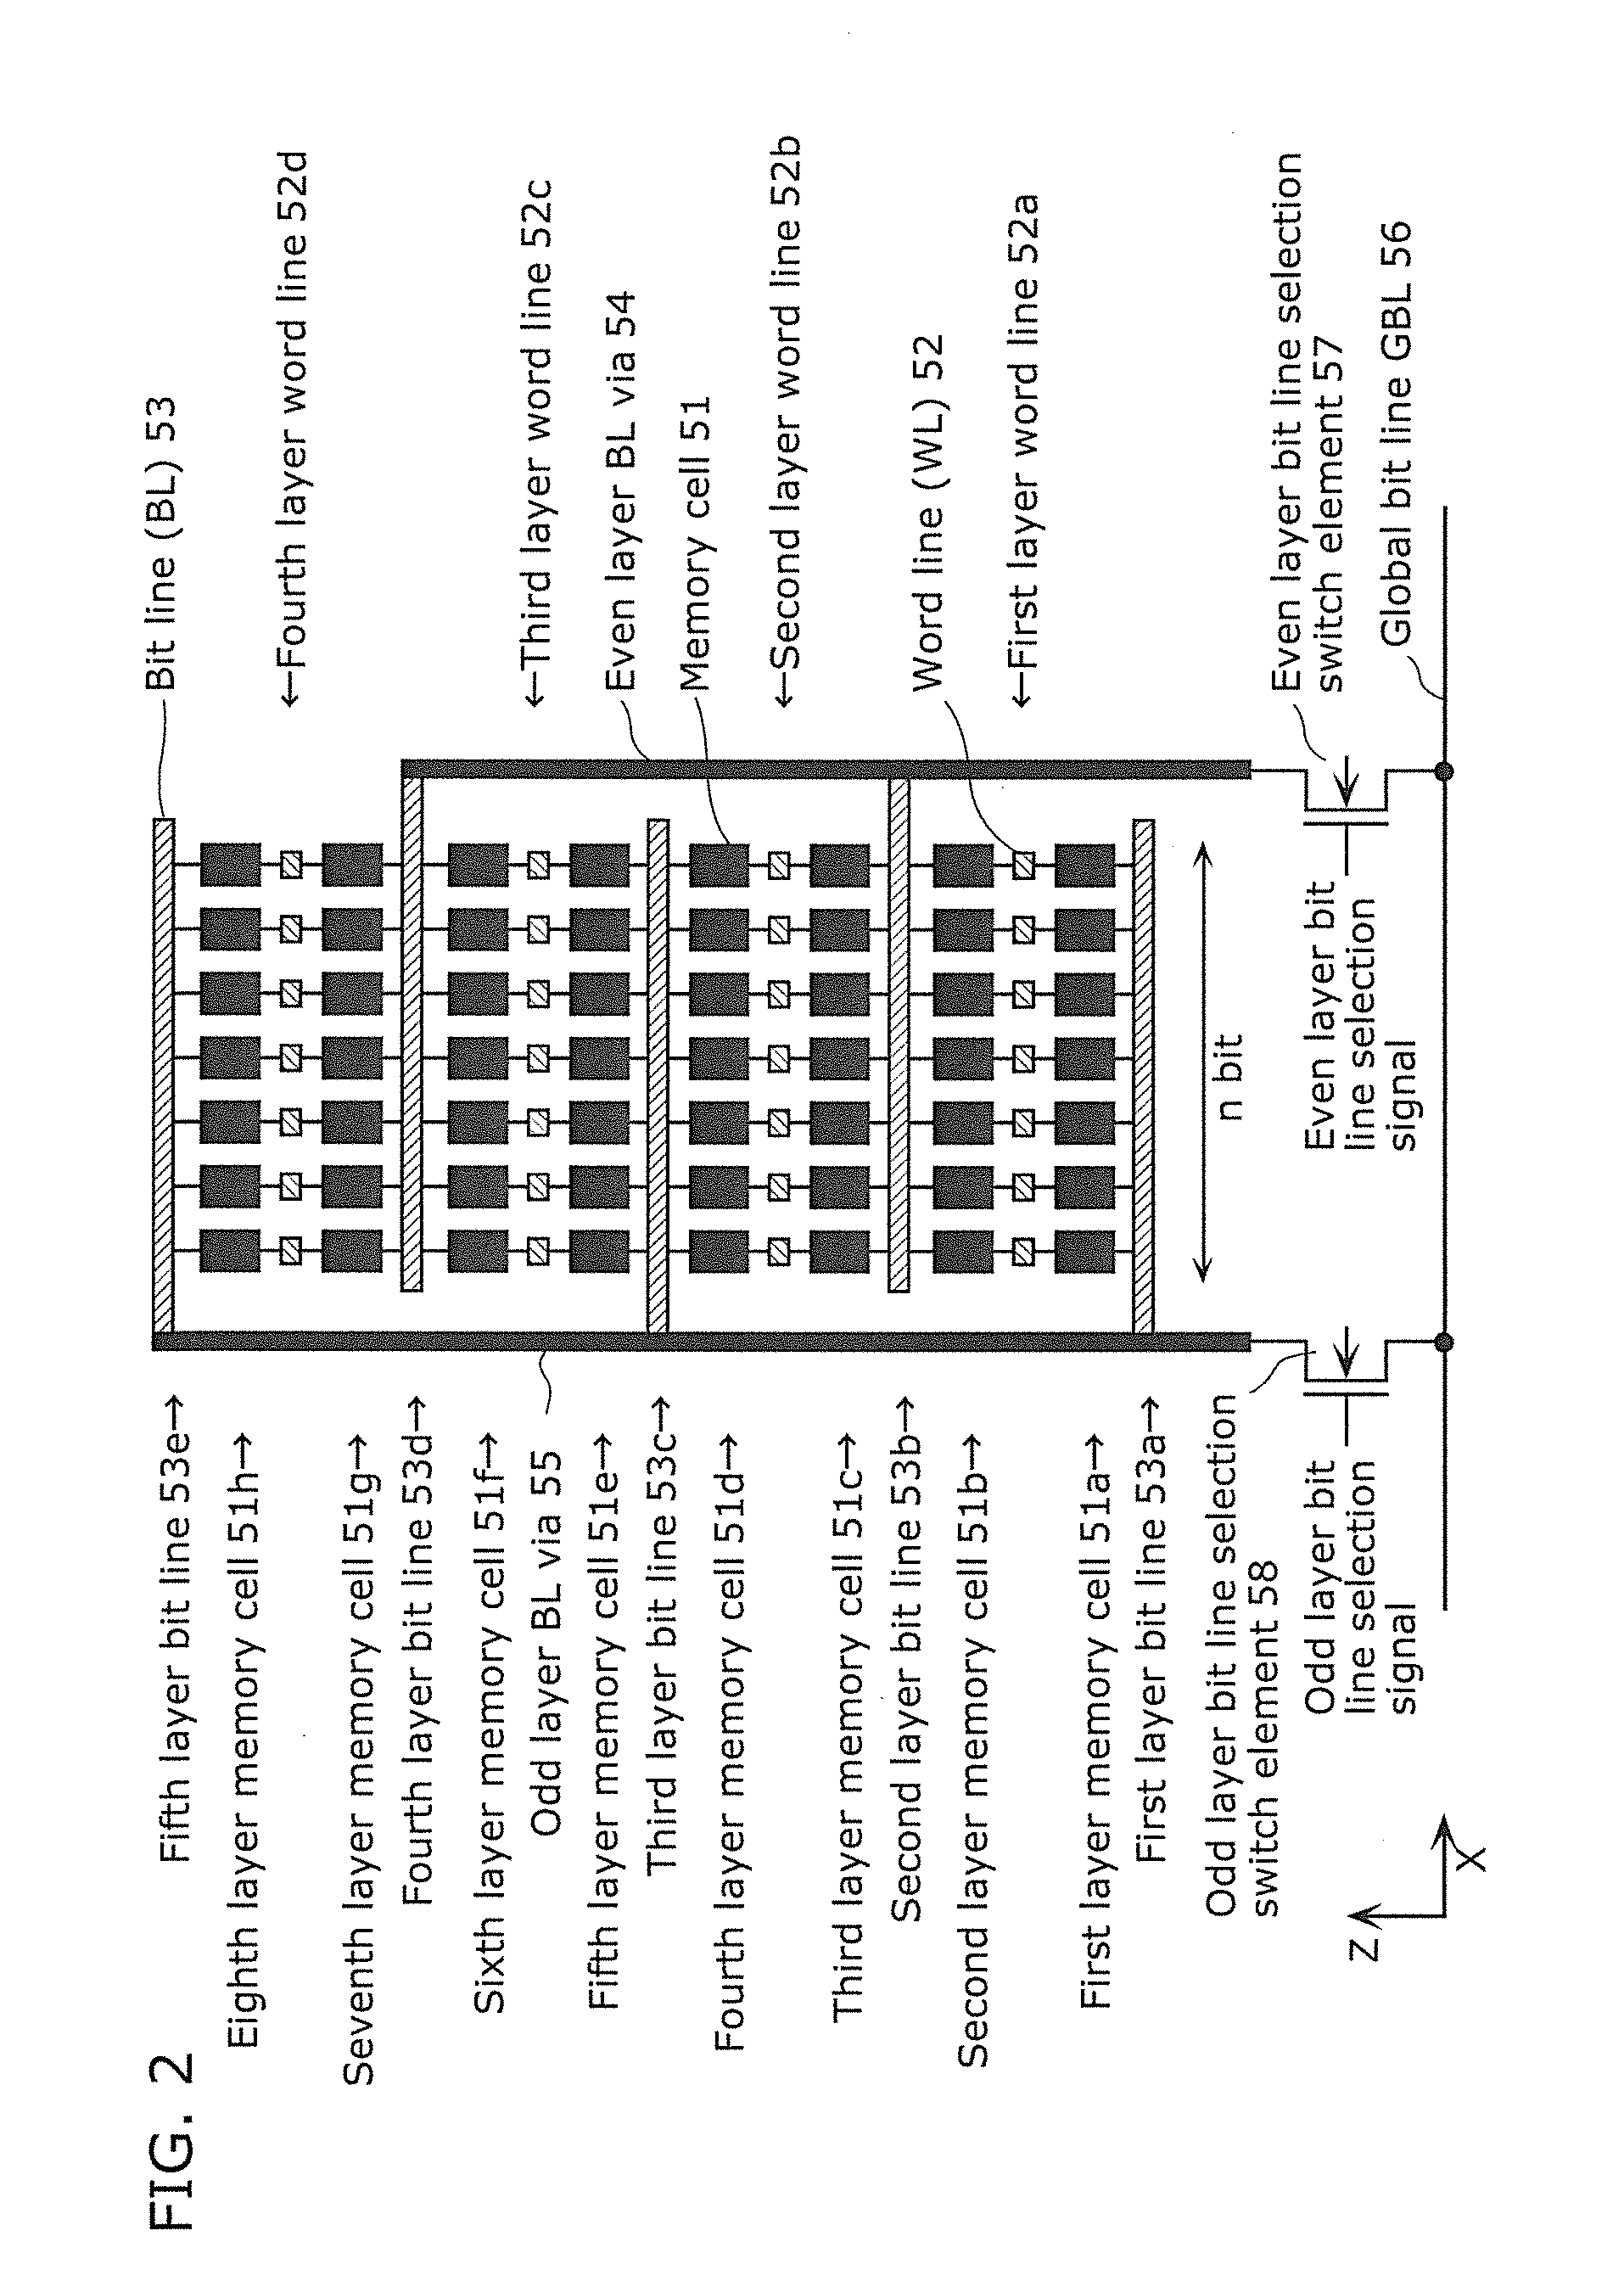 Cross point variable resistance nonvolatile memory device